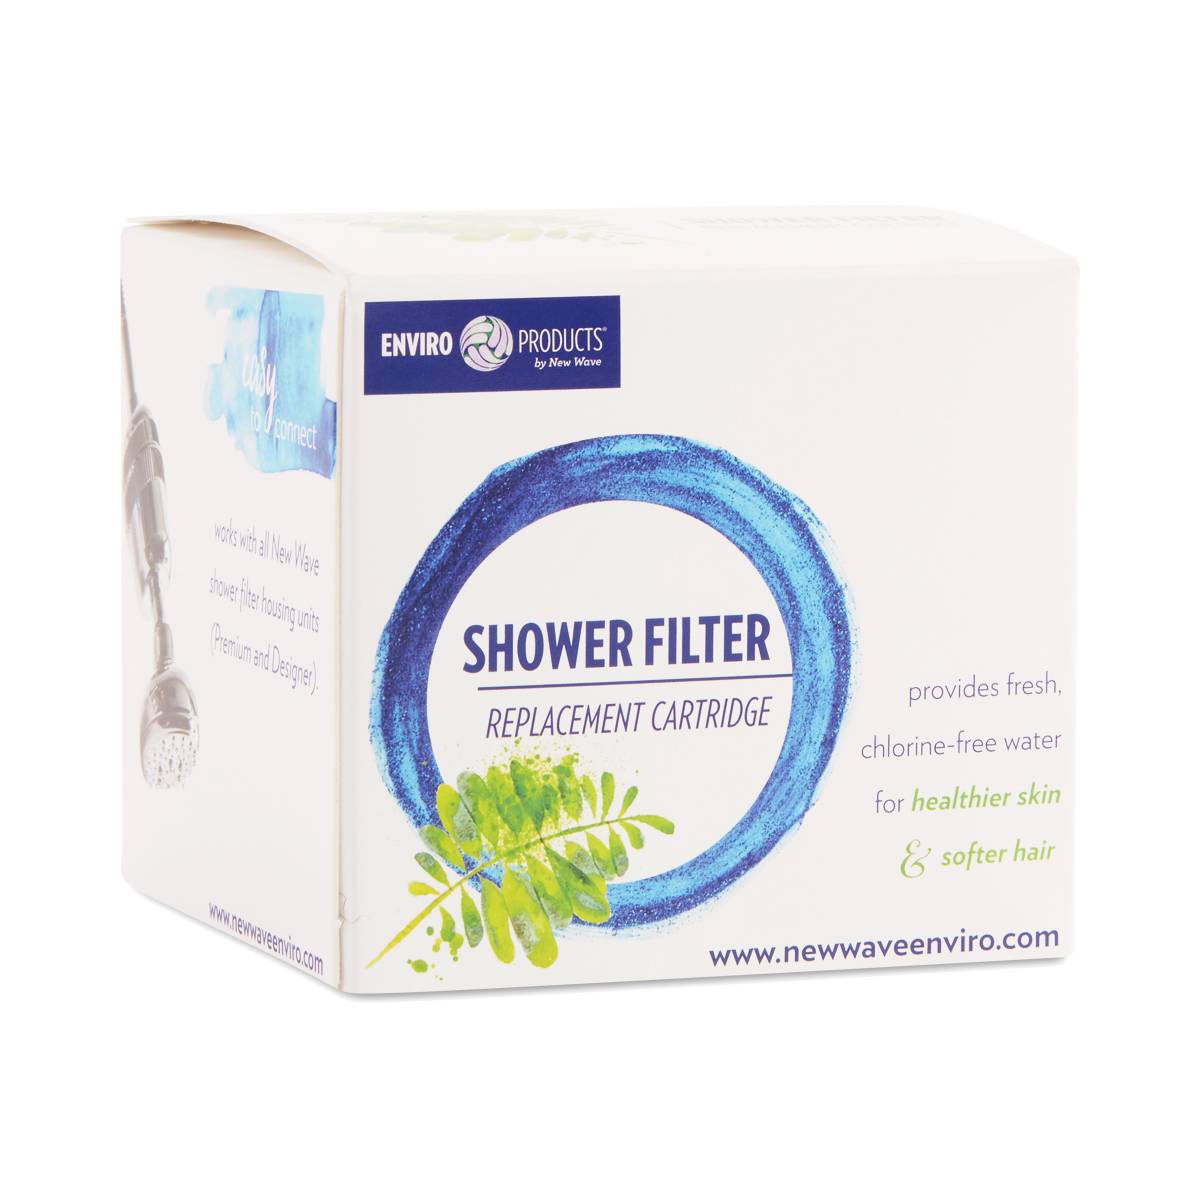 Enviro Products Shower Filter Replacement Cartridge